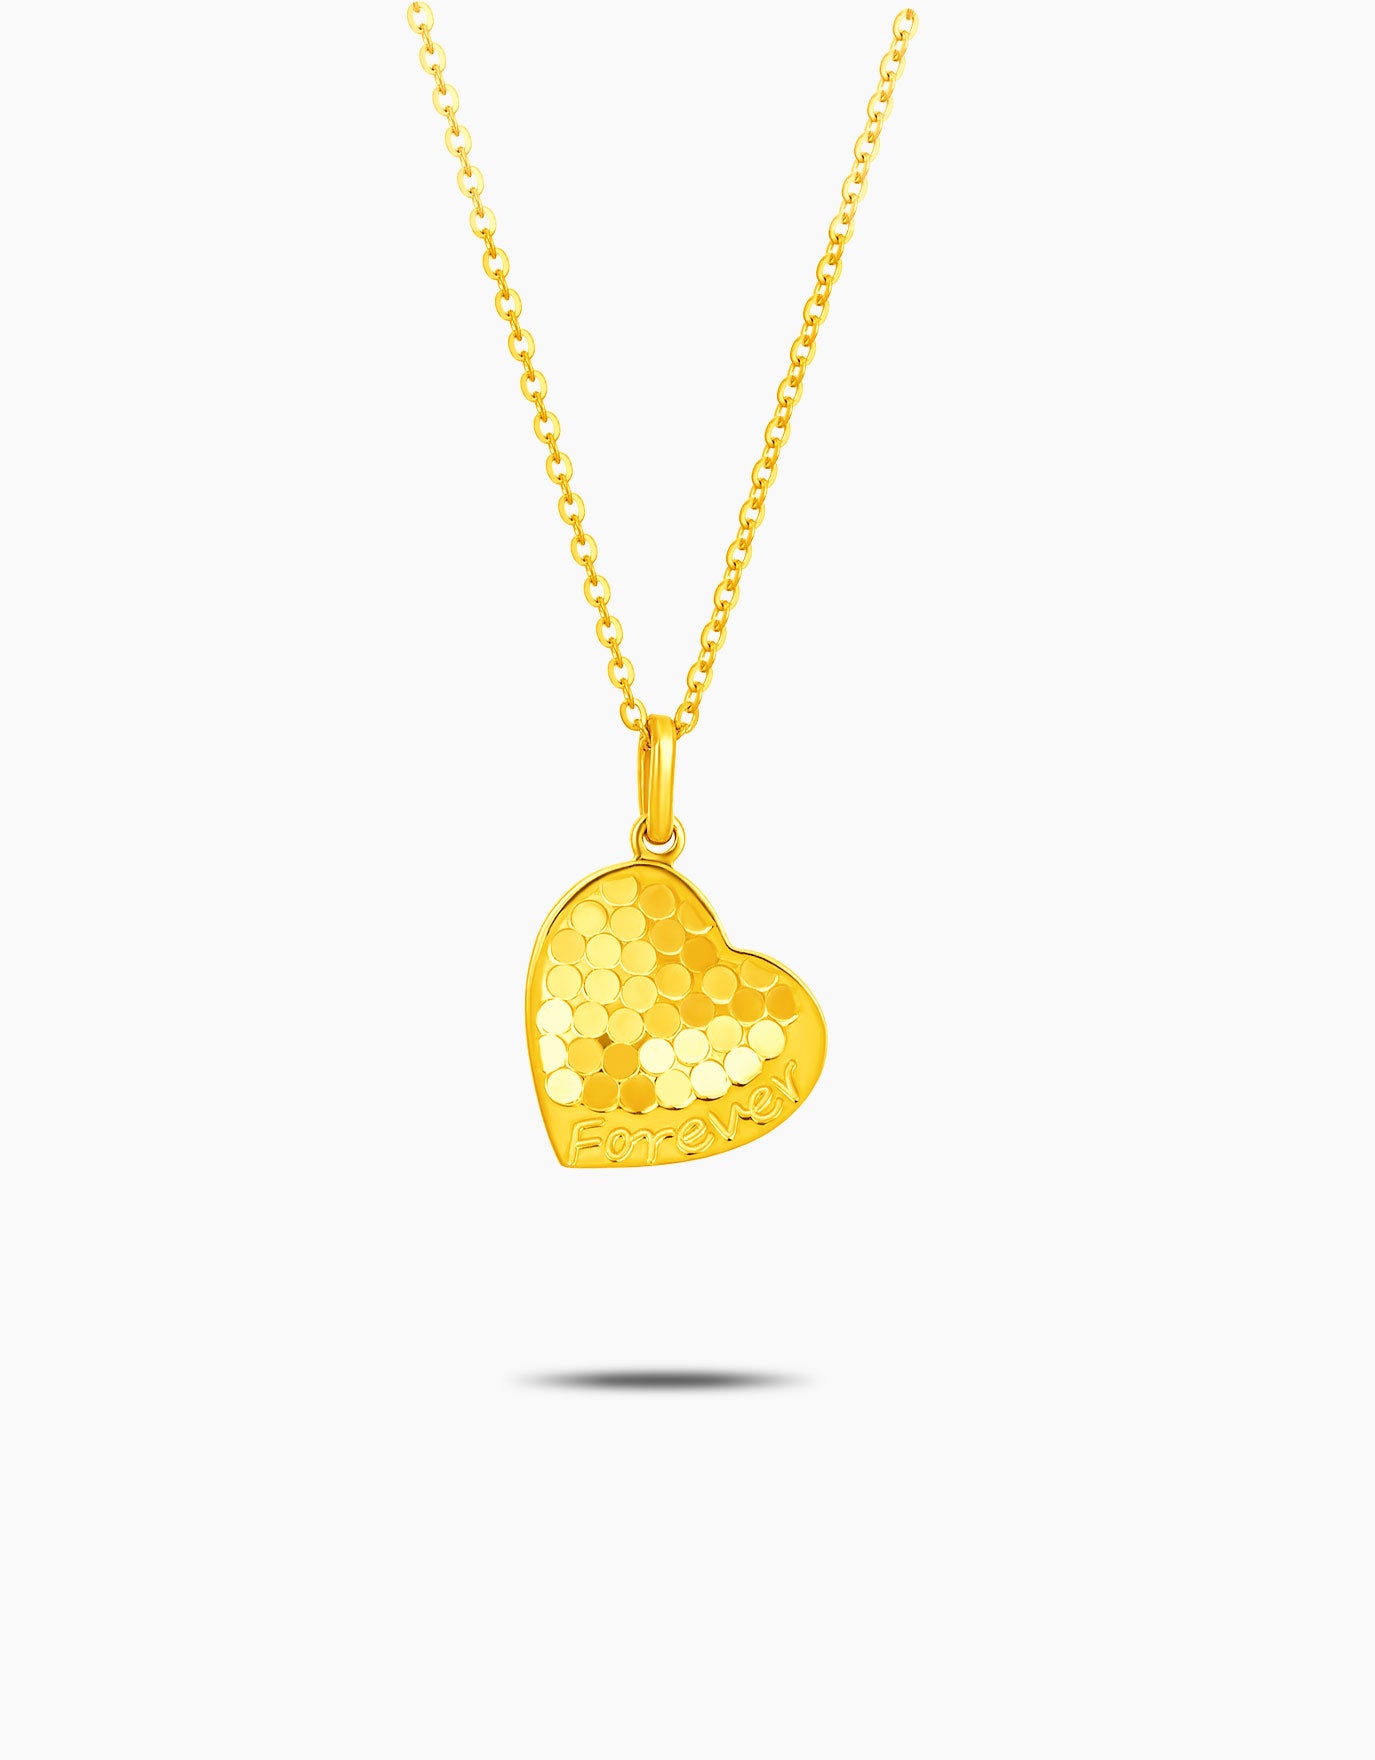 LVC 9IN Honeycombed Heart 999 Gold Necklace